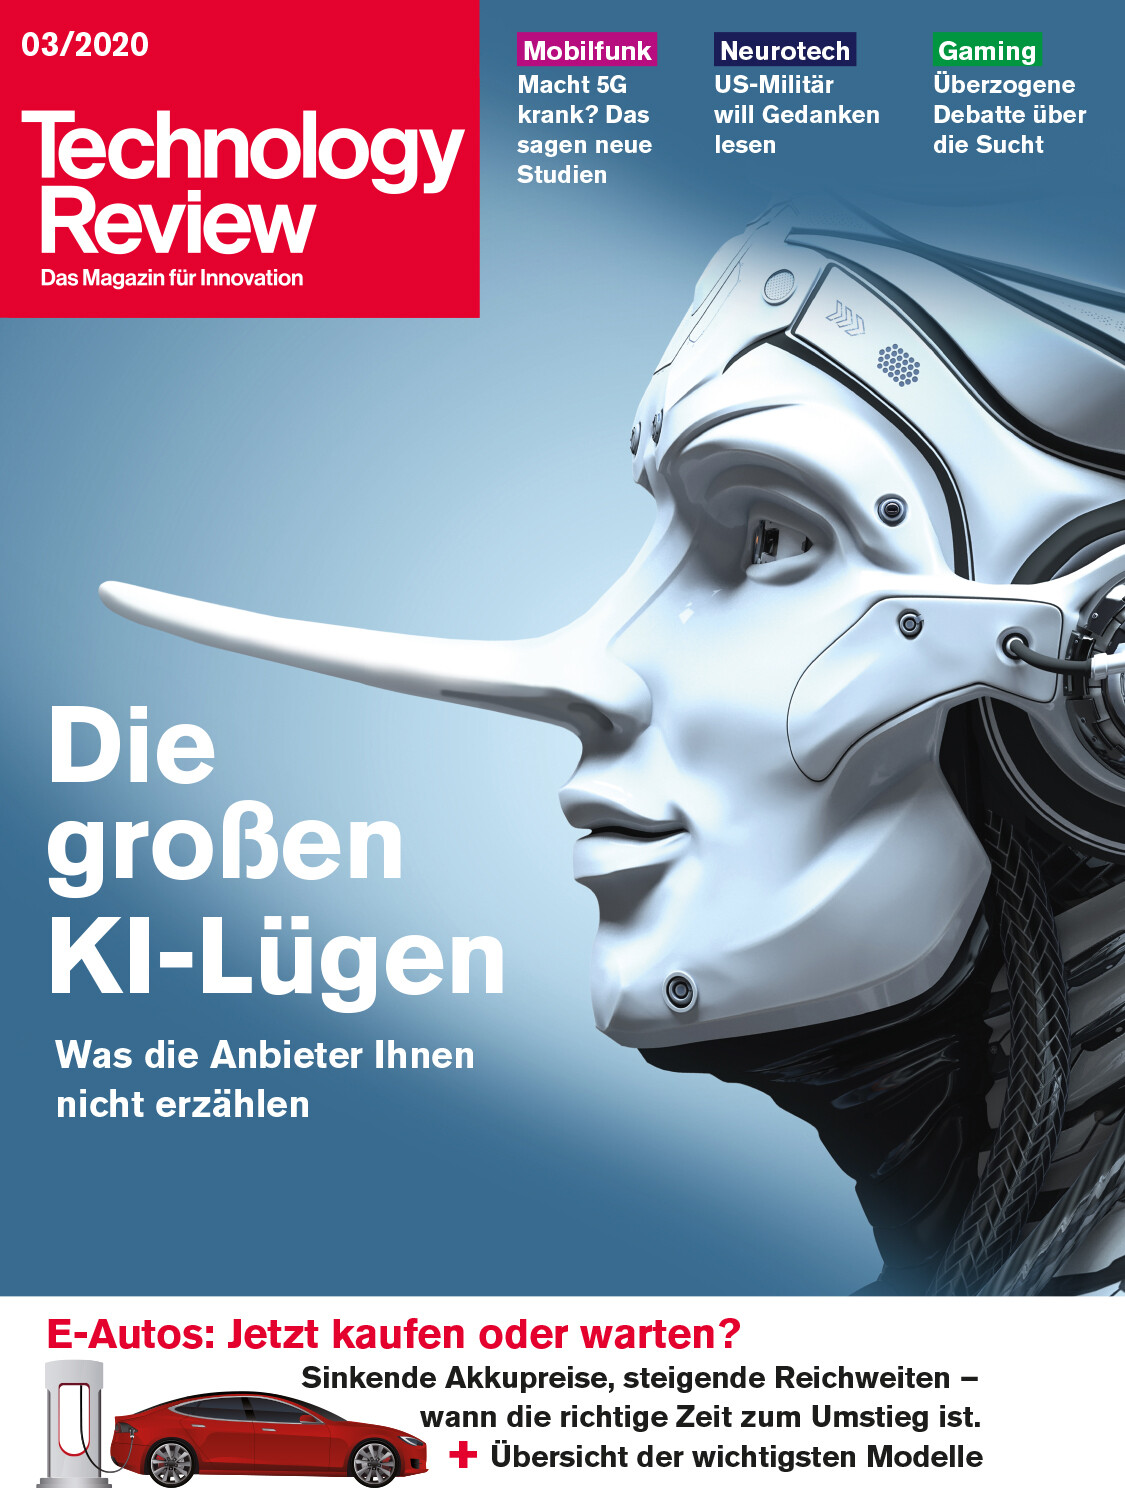 Technology Review 03/2020